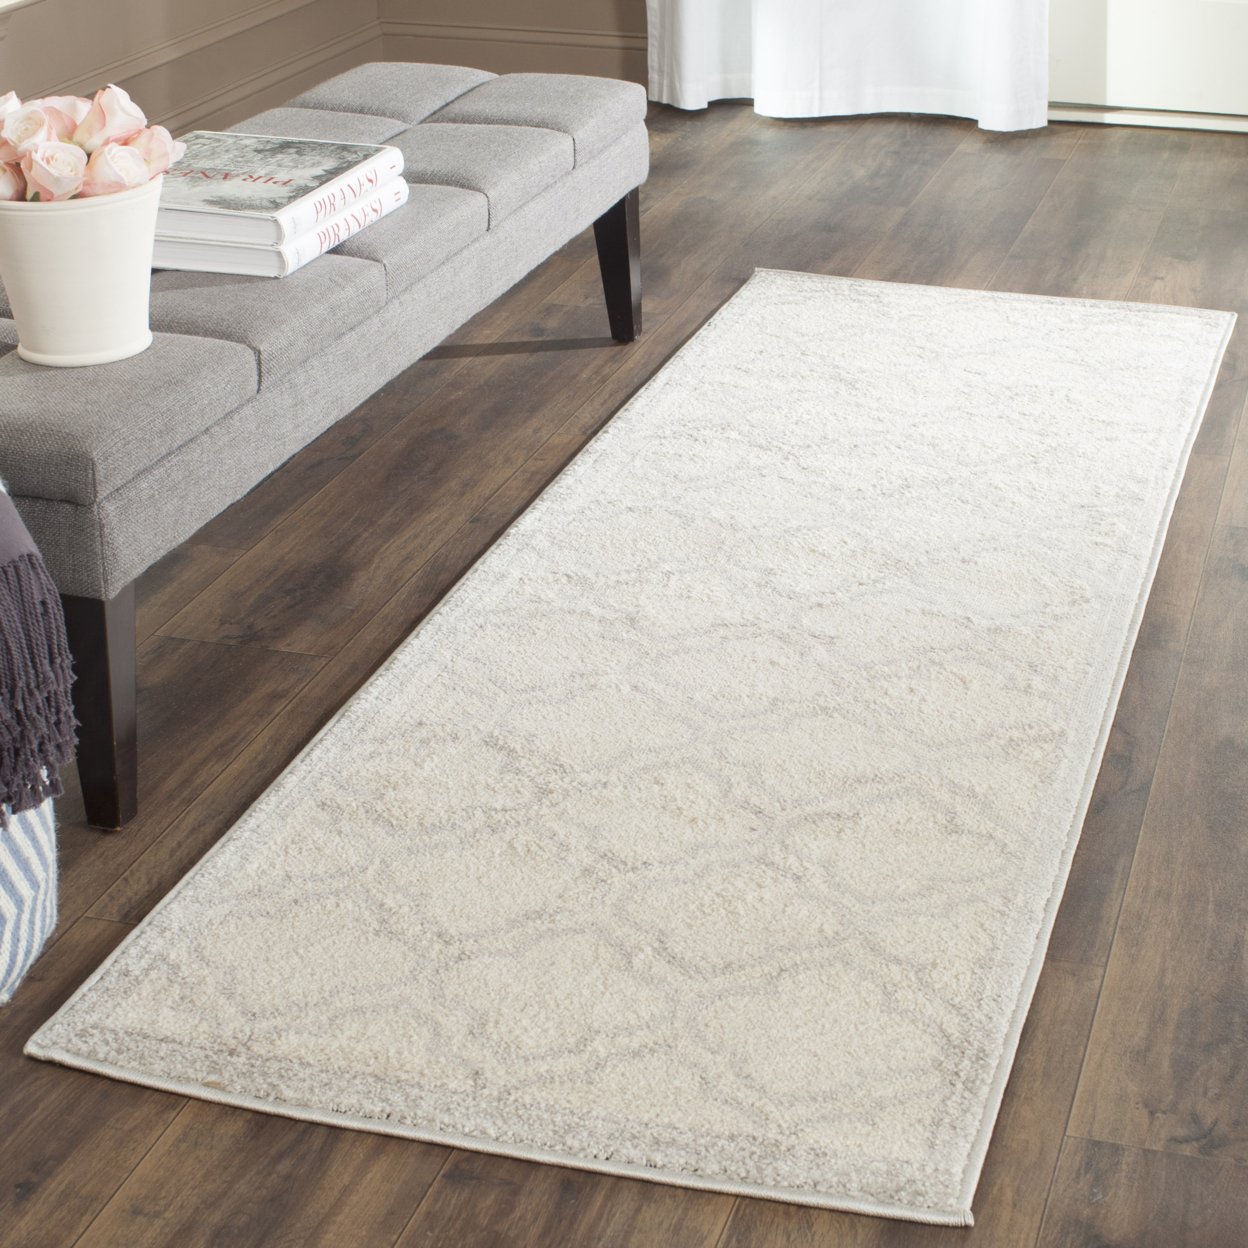 SAFAVIEH Amherst Collection AMT412E Ivory/Light Grey Rug - 8' X 10'